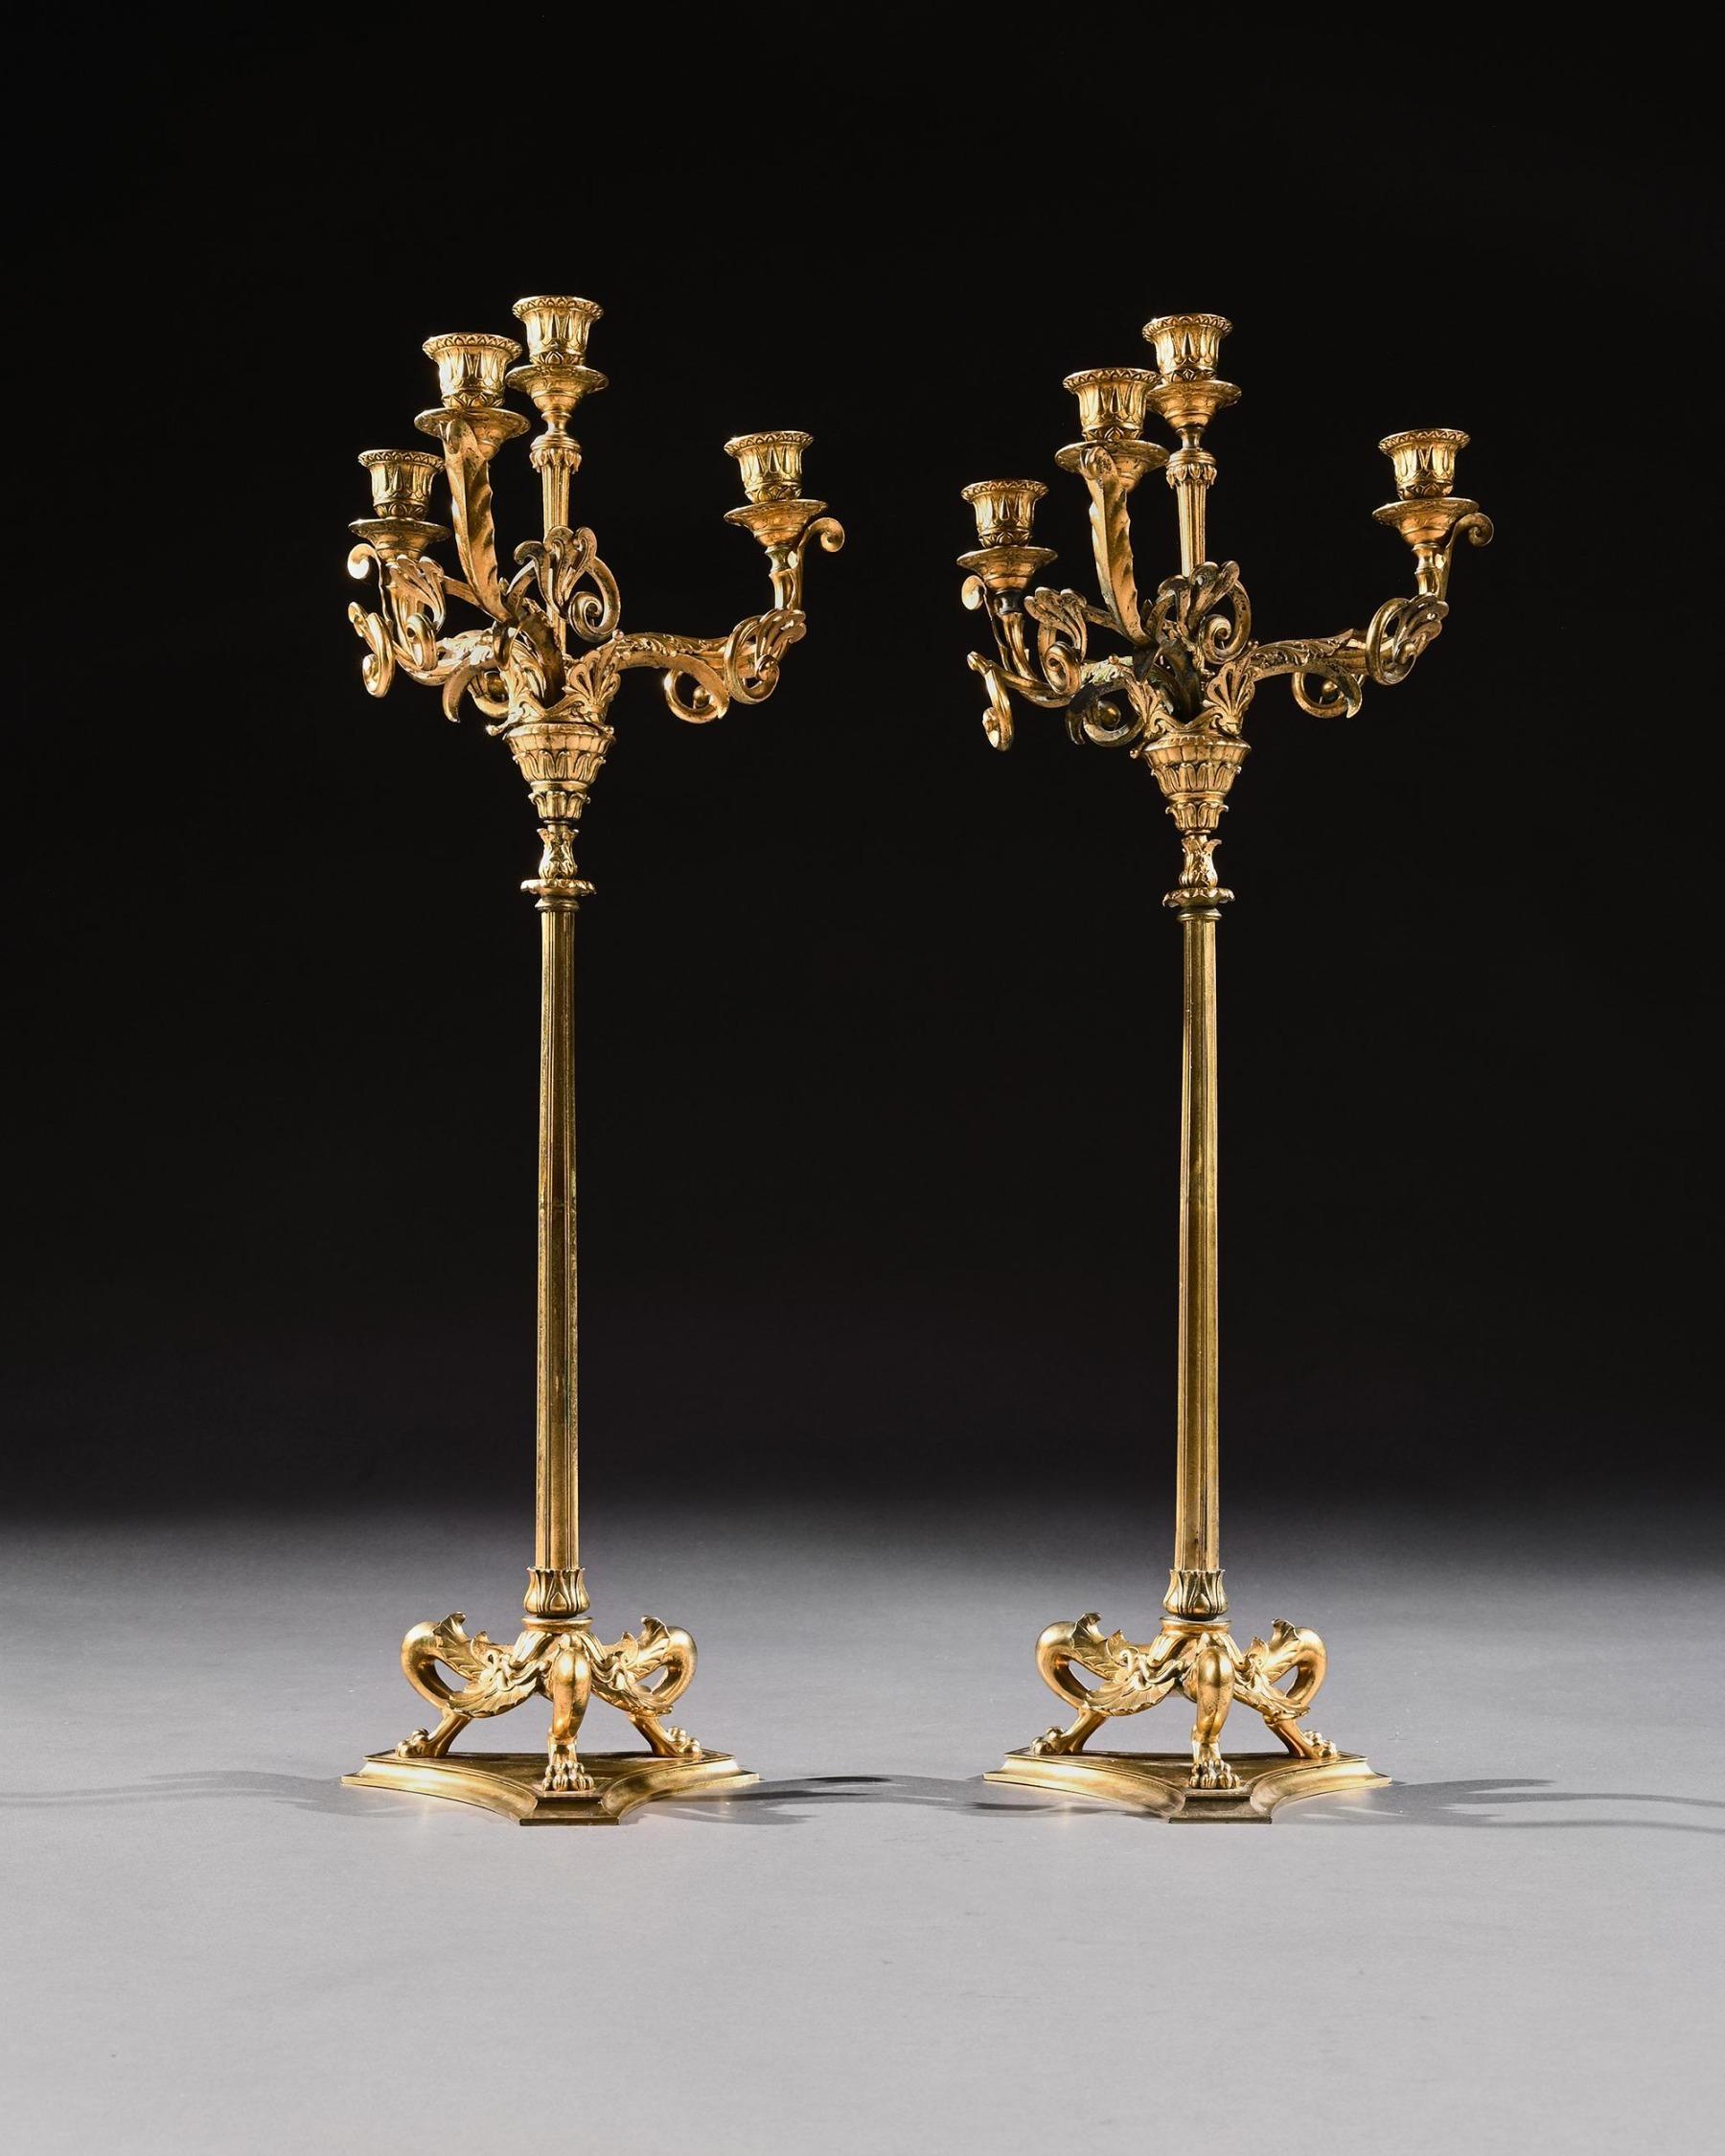 An elegant pair of gilt brass neoclassical Revival four light candelabra by Elkington and Co.

English, circa 1880.

The three leaf-cast scrolling branches enclosing a confirming scones above slender string stems with lappet-cast collars on